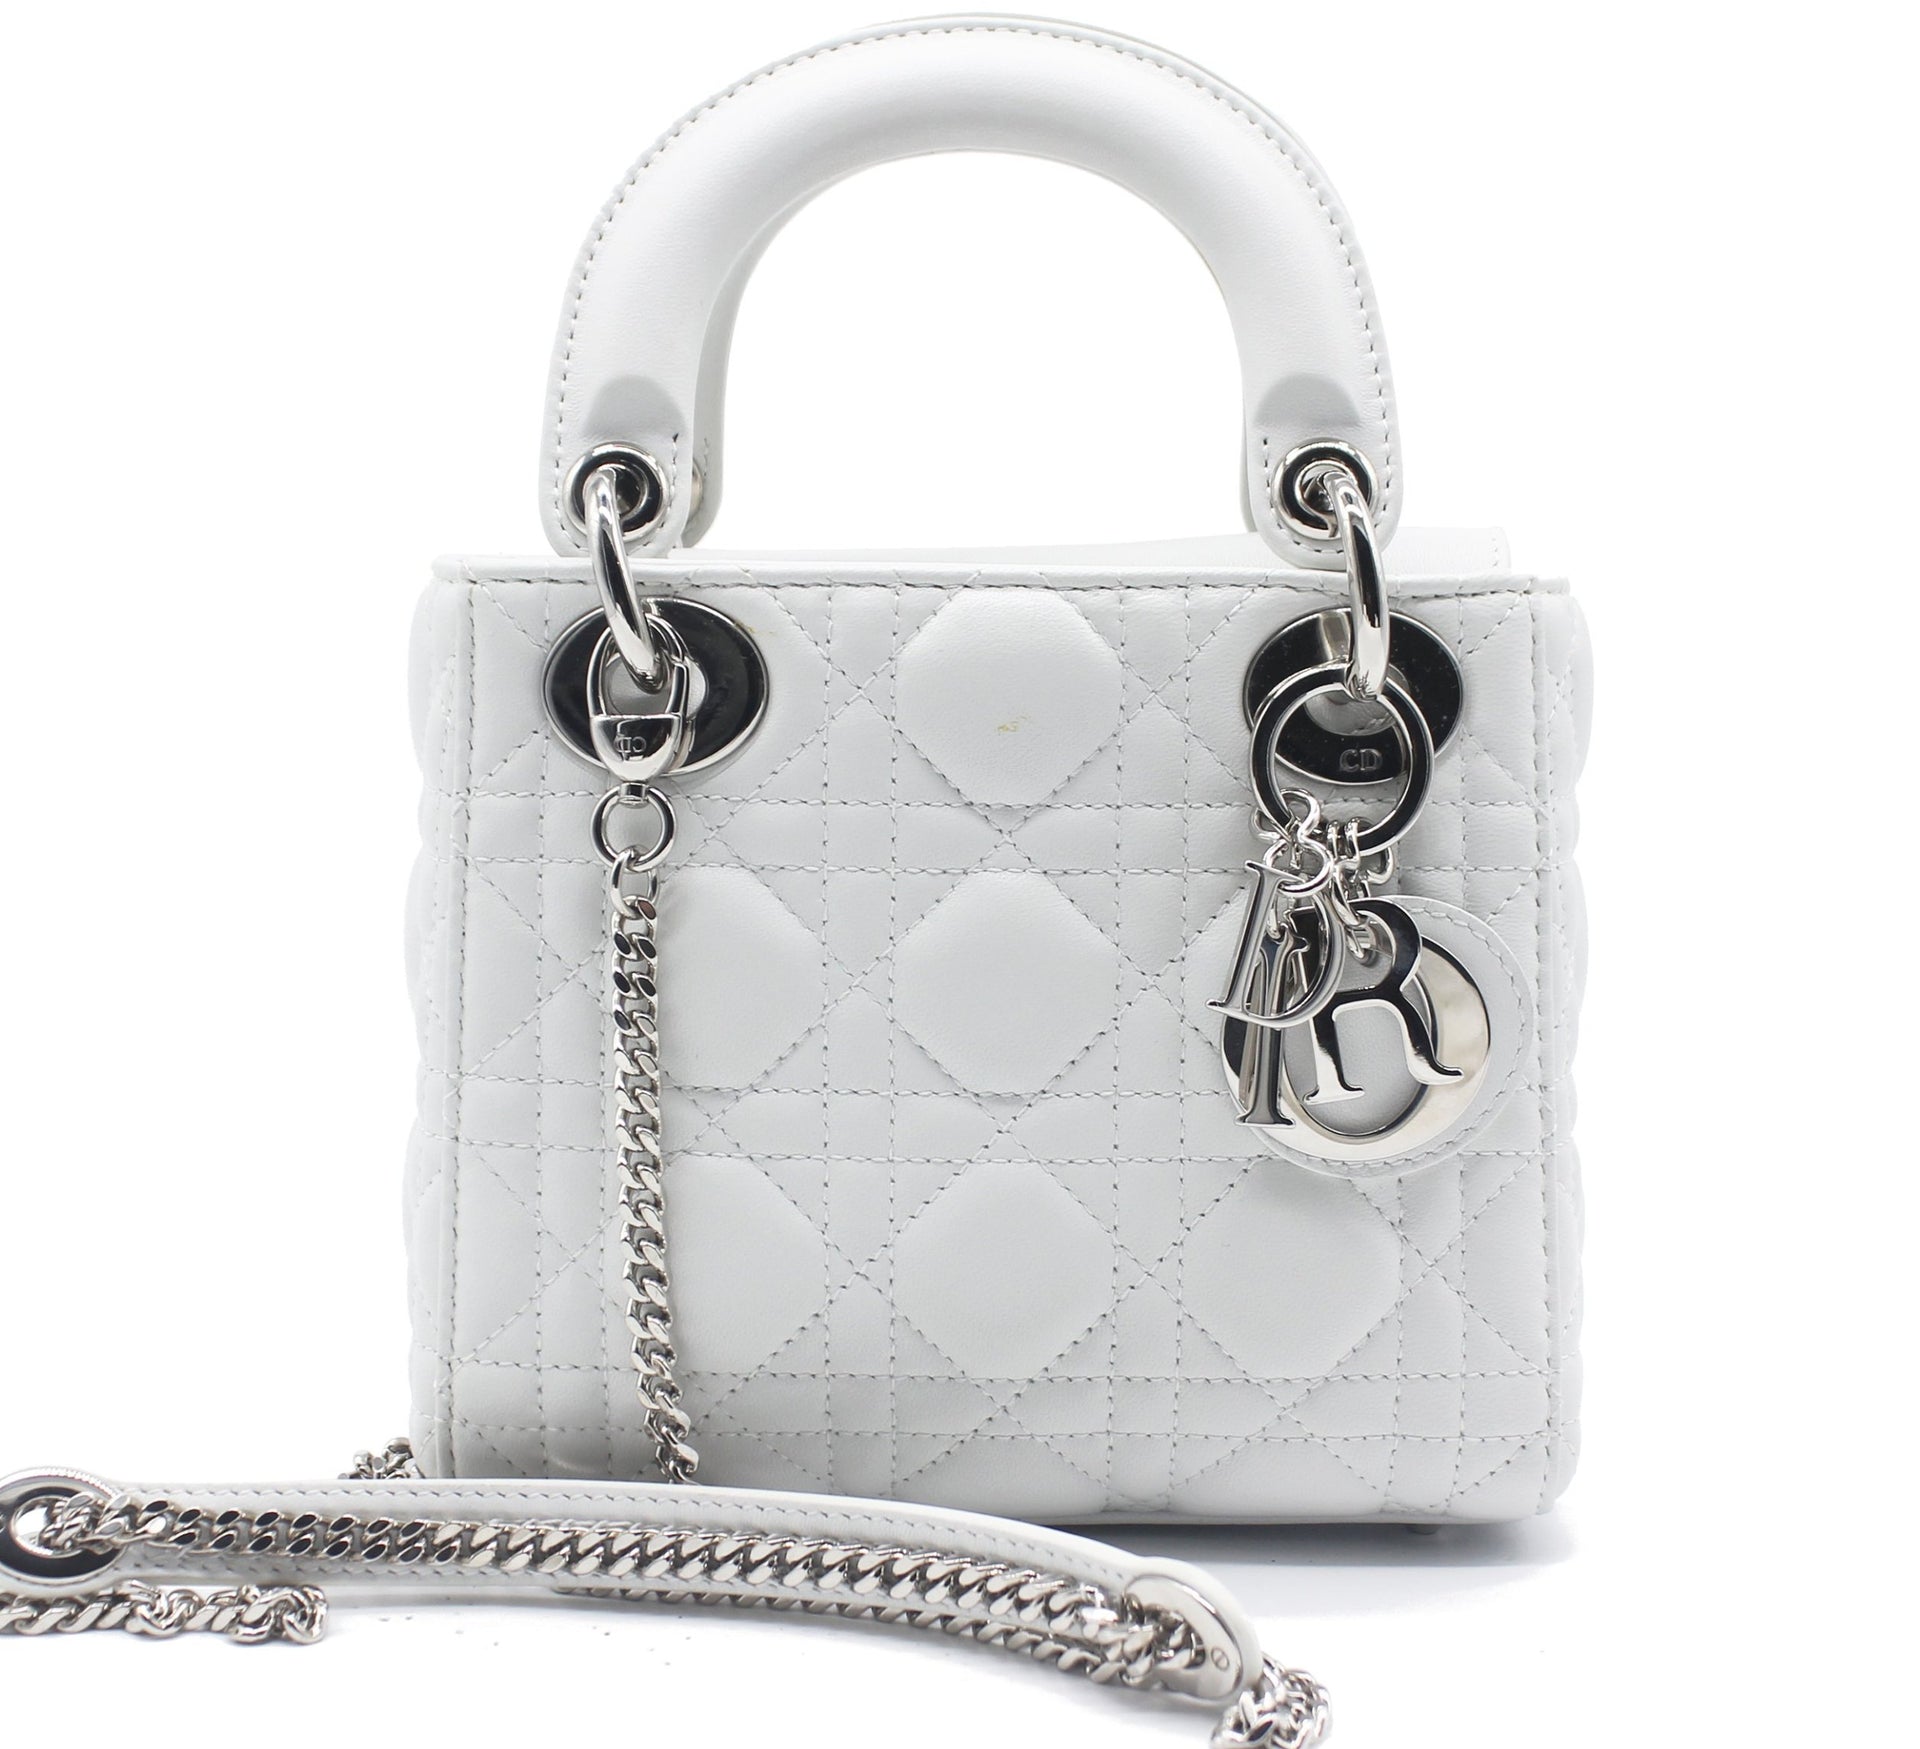 Dior Mini Lady Dior with Chain in White Lambskin Leather